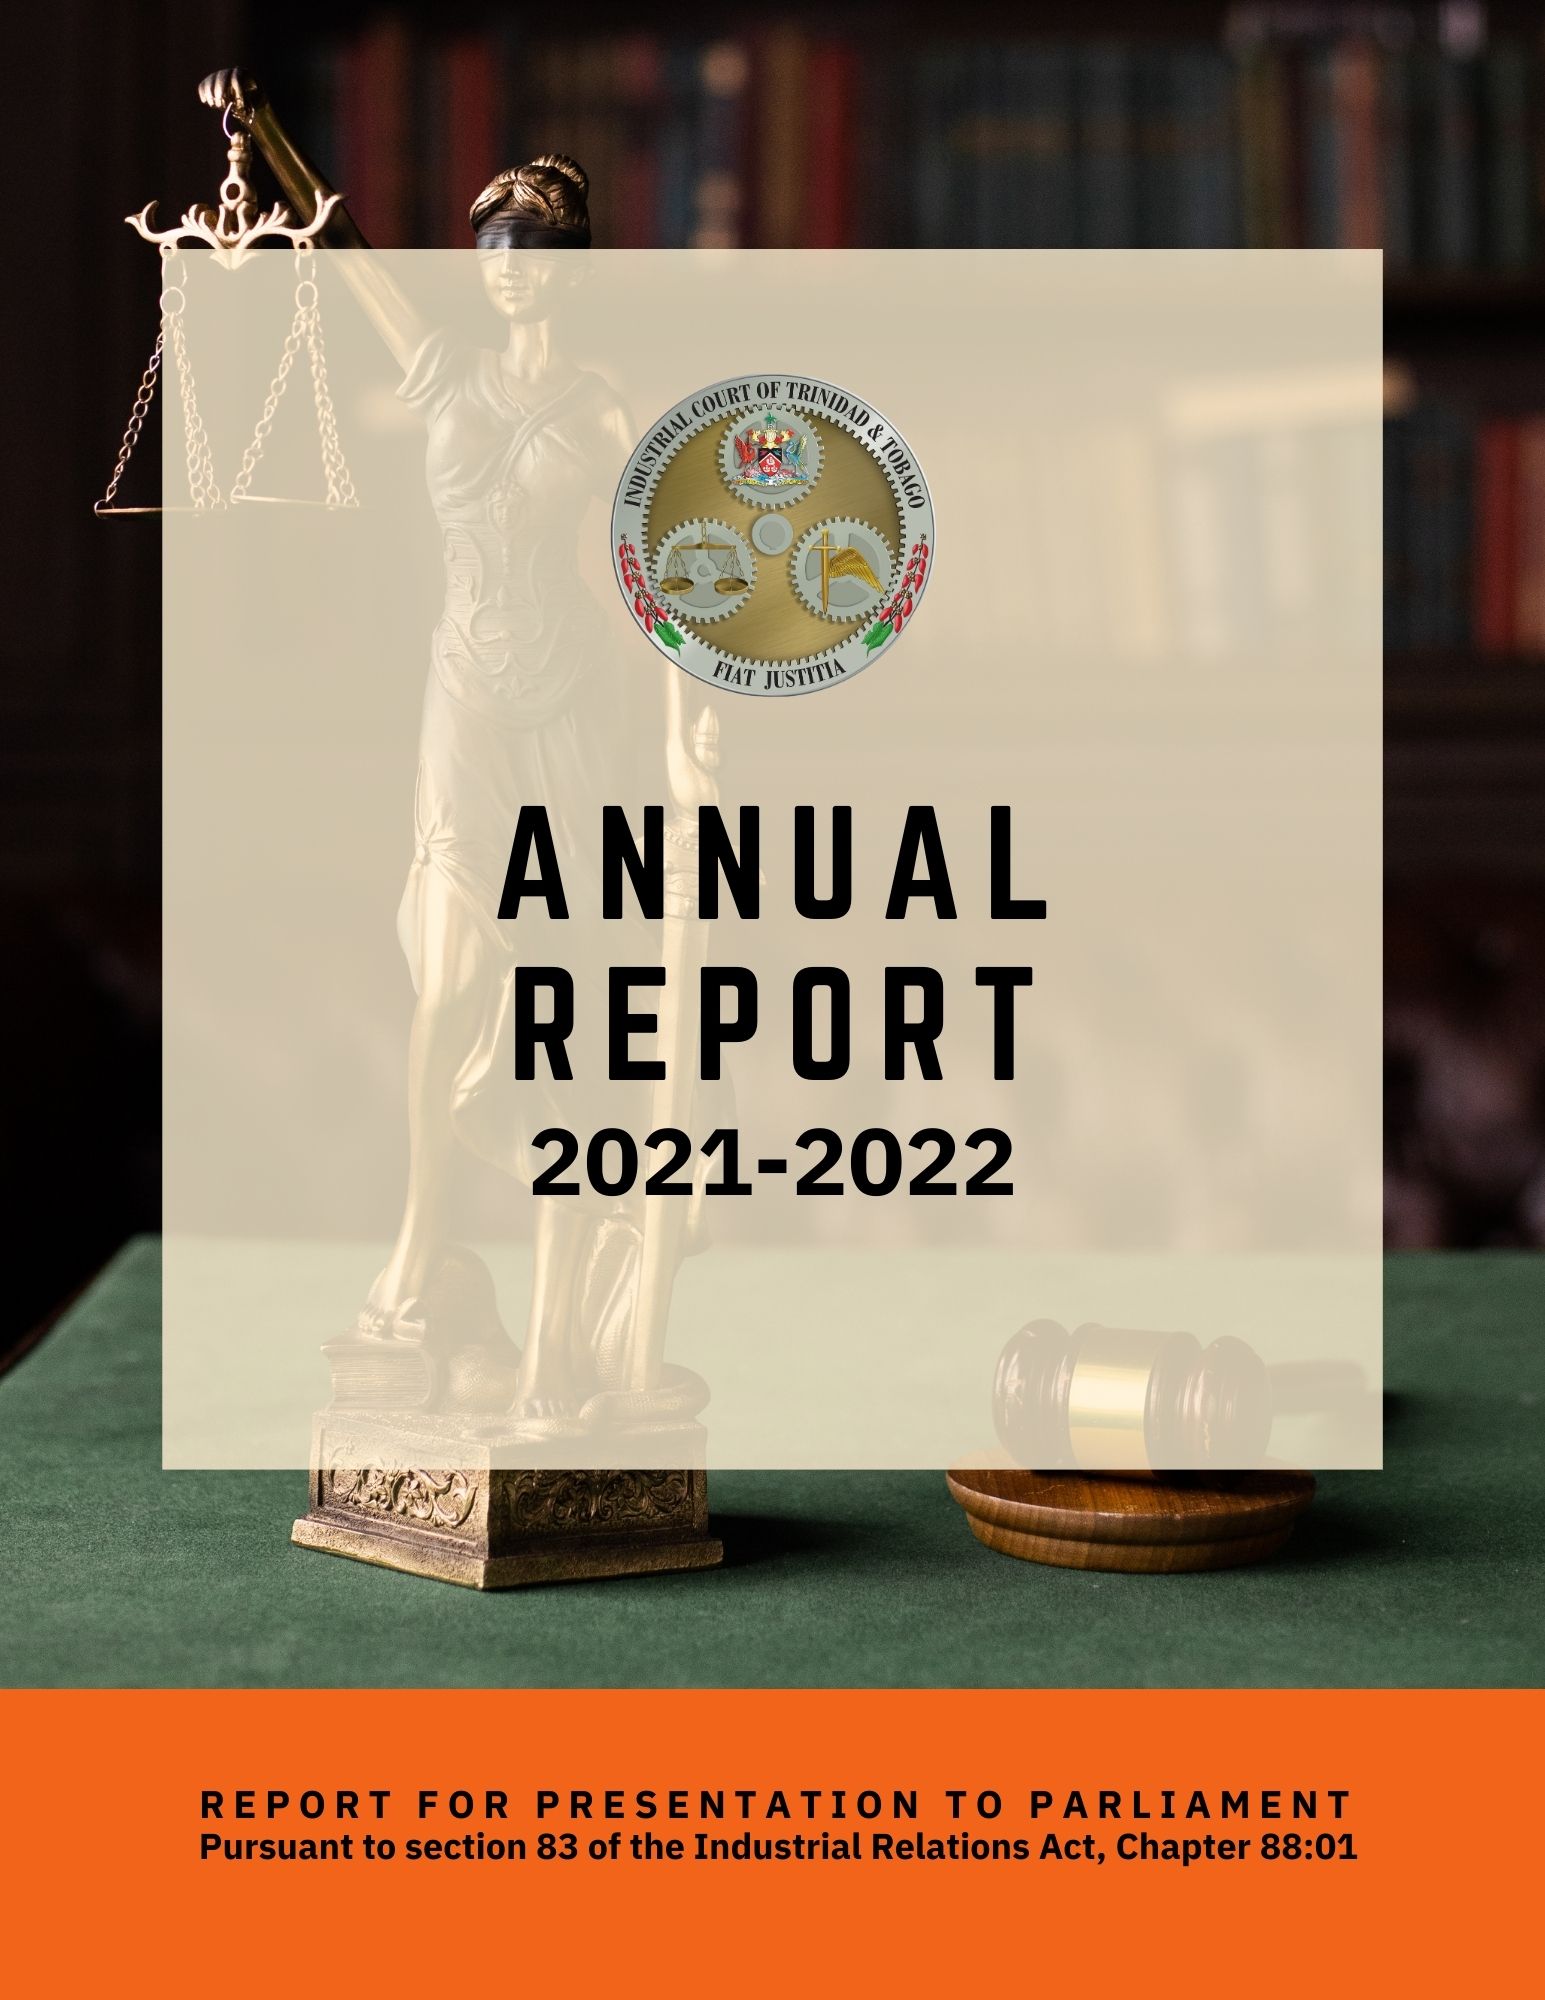 2021 - 2022 Annual Report of the Industrial Court of Trinidad and Tobago